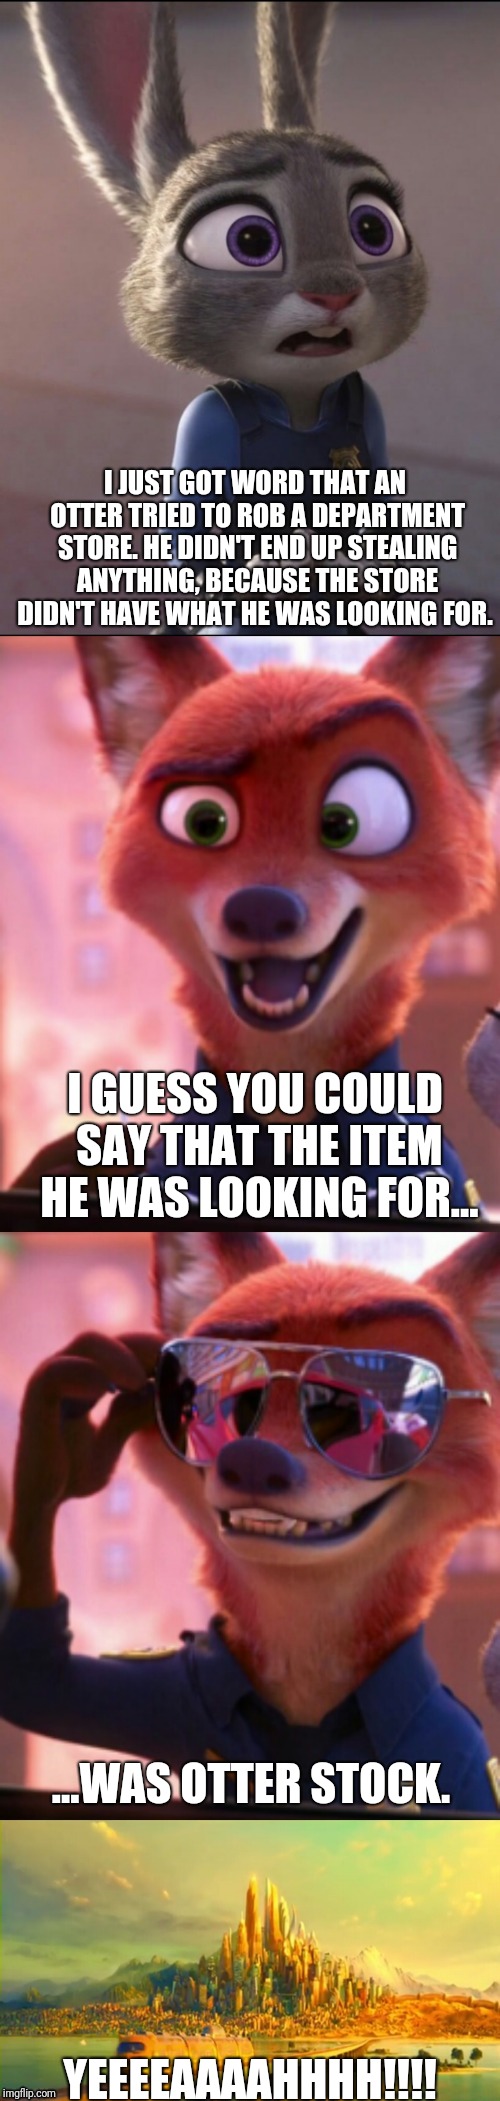 CSI: Zootopia 15 | I JUST GOT WORD THAT AN OTTER TRIED TO ROB A DEPARTMENT STORE. HE DIDN'T END UP STEALING ANYTHING, BECAUSE THE STORE DIDN'T HAVE WHAT HE WAS LOOKING FOR. I GUESS YOU COULD SAY THAT THE ITEM HE WAS LOOKING FOR... ...WAS OTTER STOCK. YEEEEAAAAHHHH!!!! | image tagged in csi zootopia,zootopia,judy hopps,nick wilde,parody,funny | made w/ Imgflip meme maker